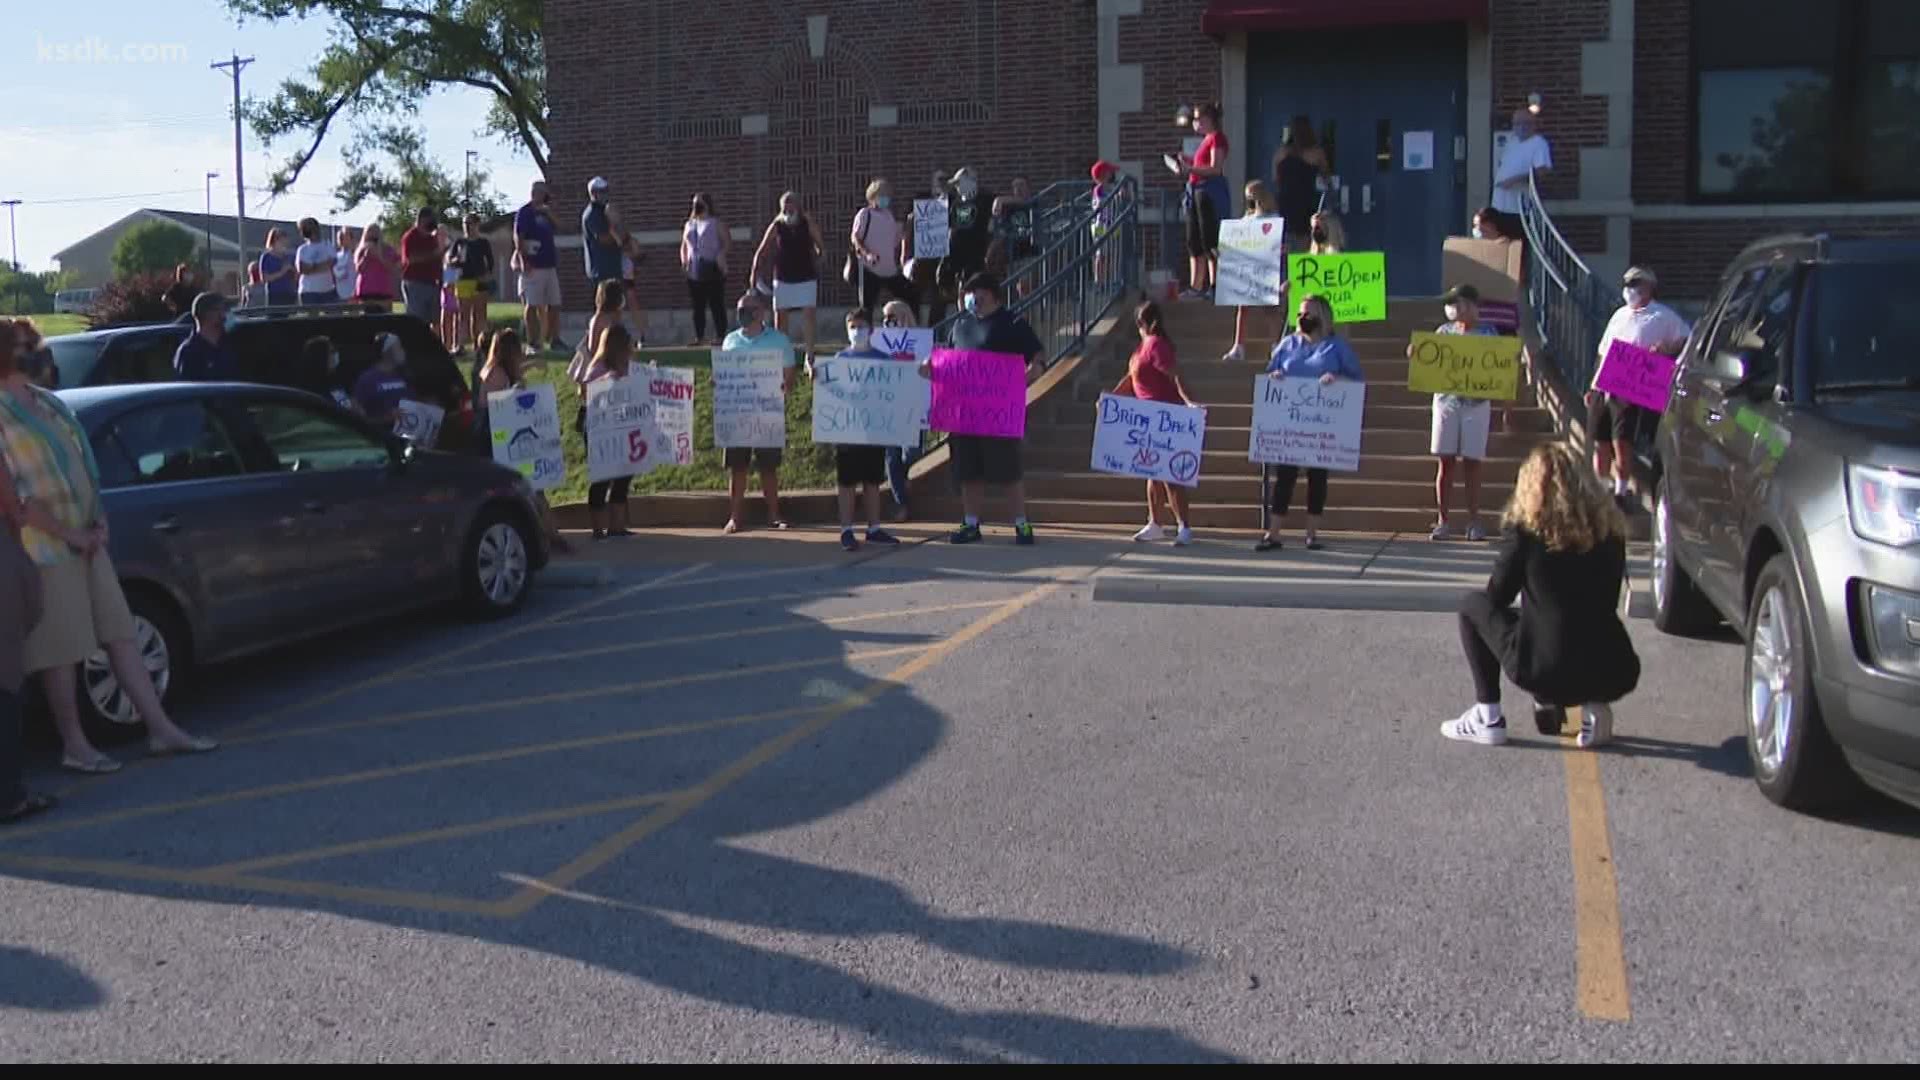 The parents say that the reopening plan should allow the option for parents to send their children to school 5 days a week if they choose to do so.